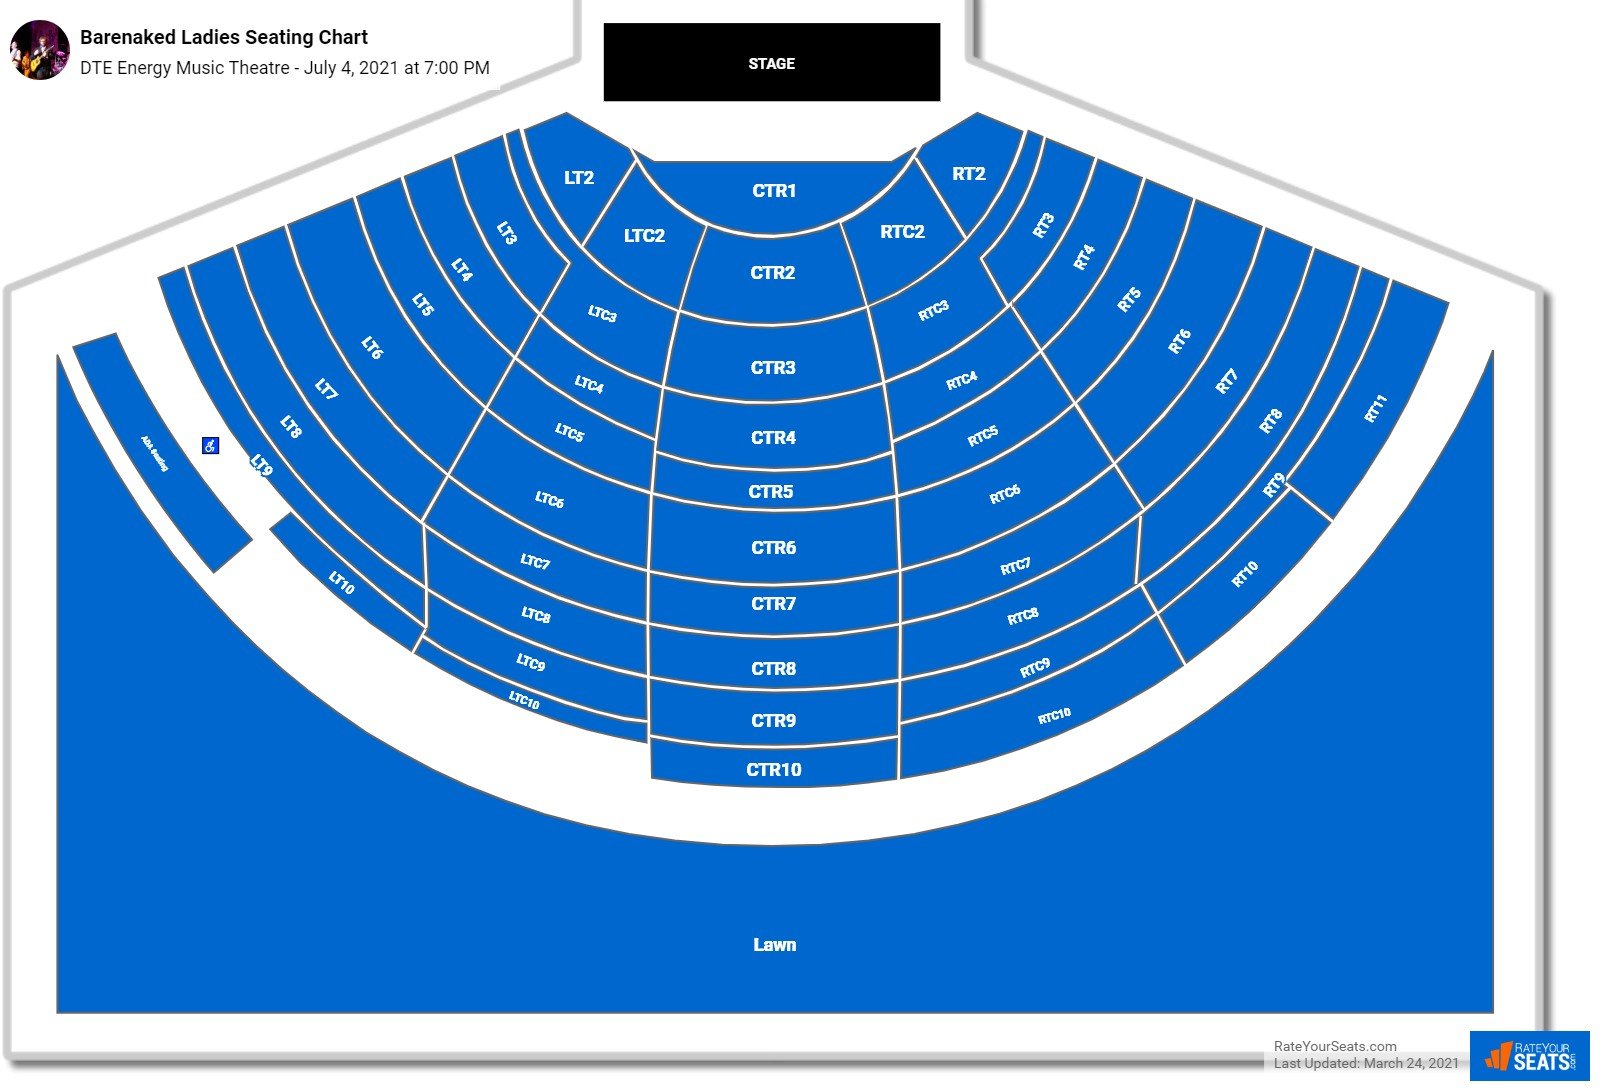 dte-energy-music-theatre-seating-chart-rateyourseats